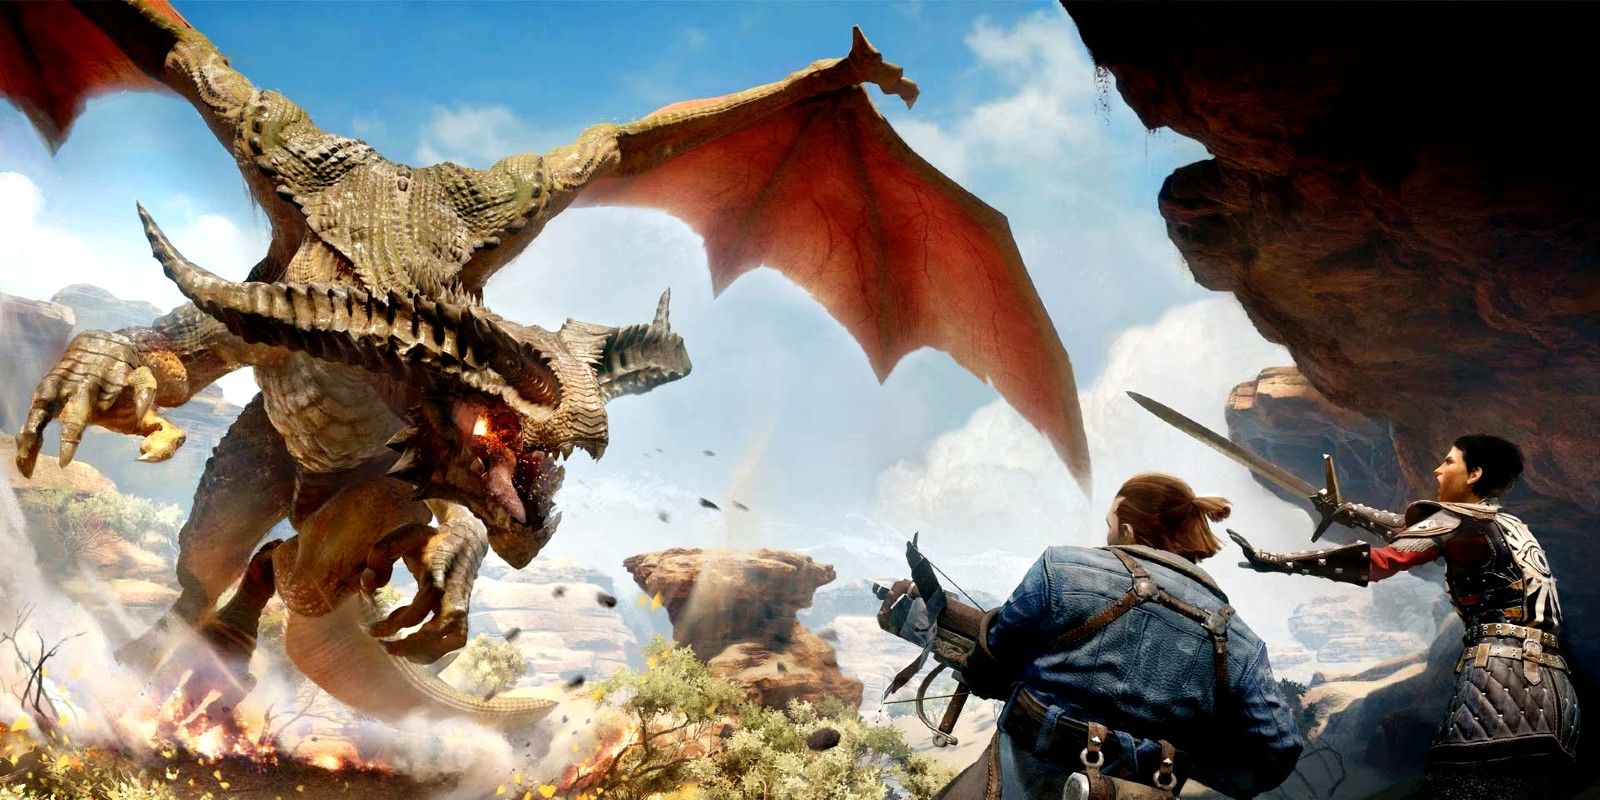 10 Best Games For Lord Of The Rings Fans (That Arent Based On The Movies)